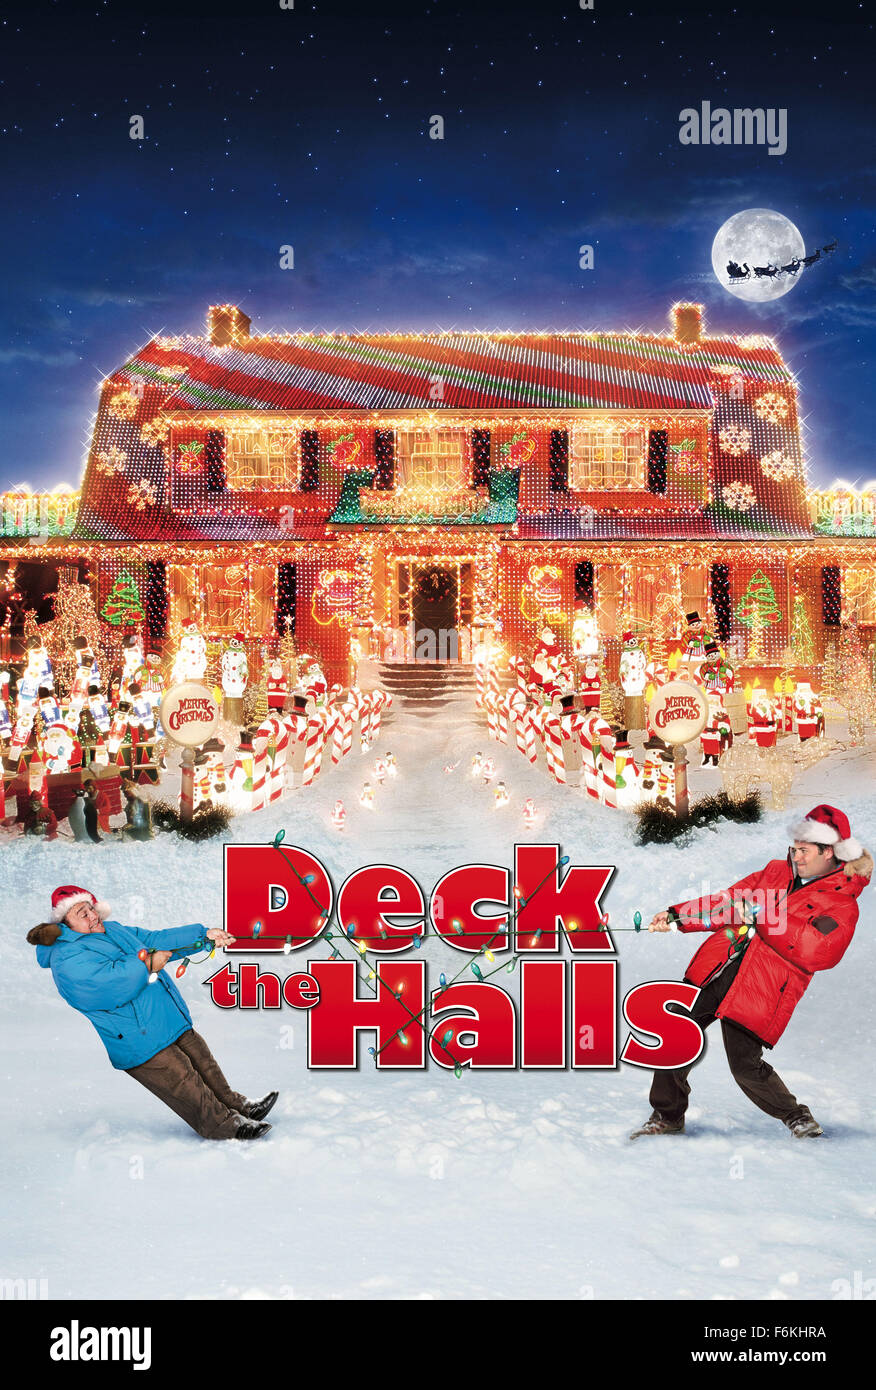 RELEASE DATE: November 22, 2006. MOVIE TITLE: Deck the Halls. STUDIO: 20th Century Fox. PLOT: This holiday comedy is centered around two neighbors in a small New England town who go to war when one of them decides to decorate his house with a so many Christmas lights that they are visible from space. The neighborhood is turned upside down as the families try to discover the true meaning of Christmas. PICTURED: DANNY DEVITO as Buddy Hall and MATTHEW BRODERICK as Steve Finch. Stock Photo